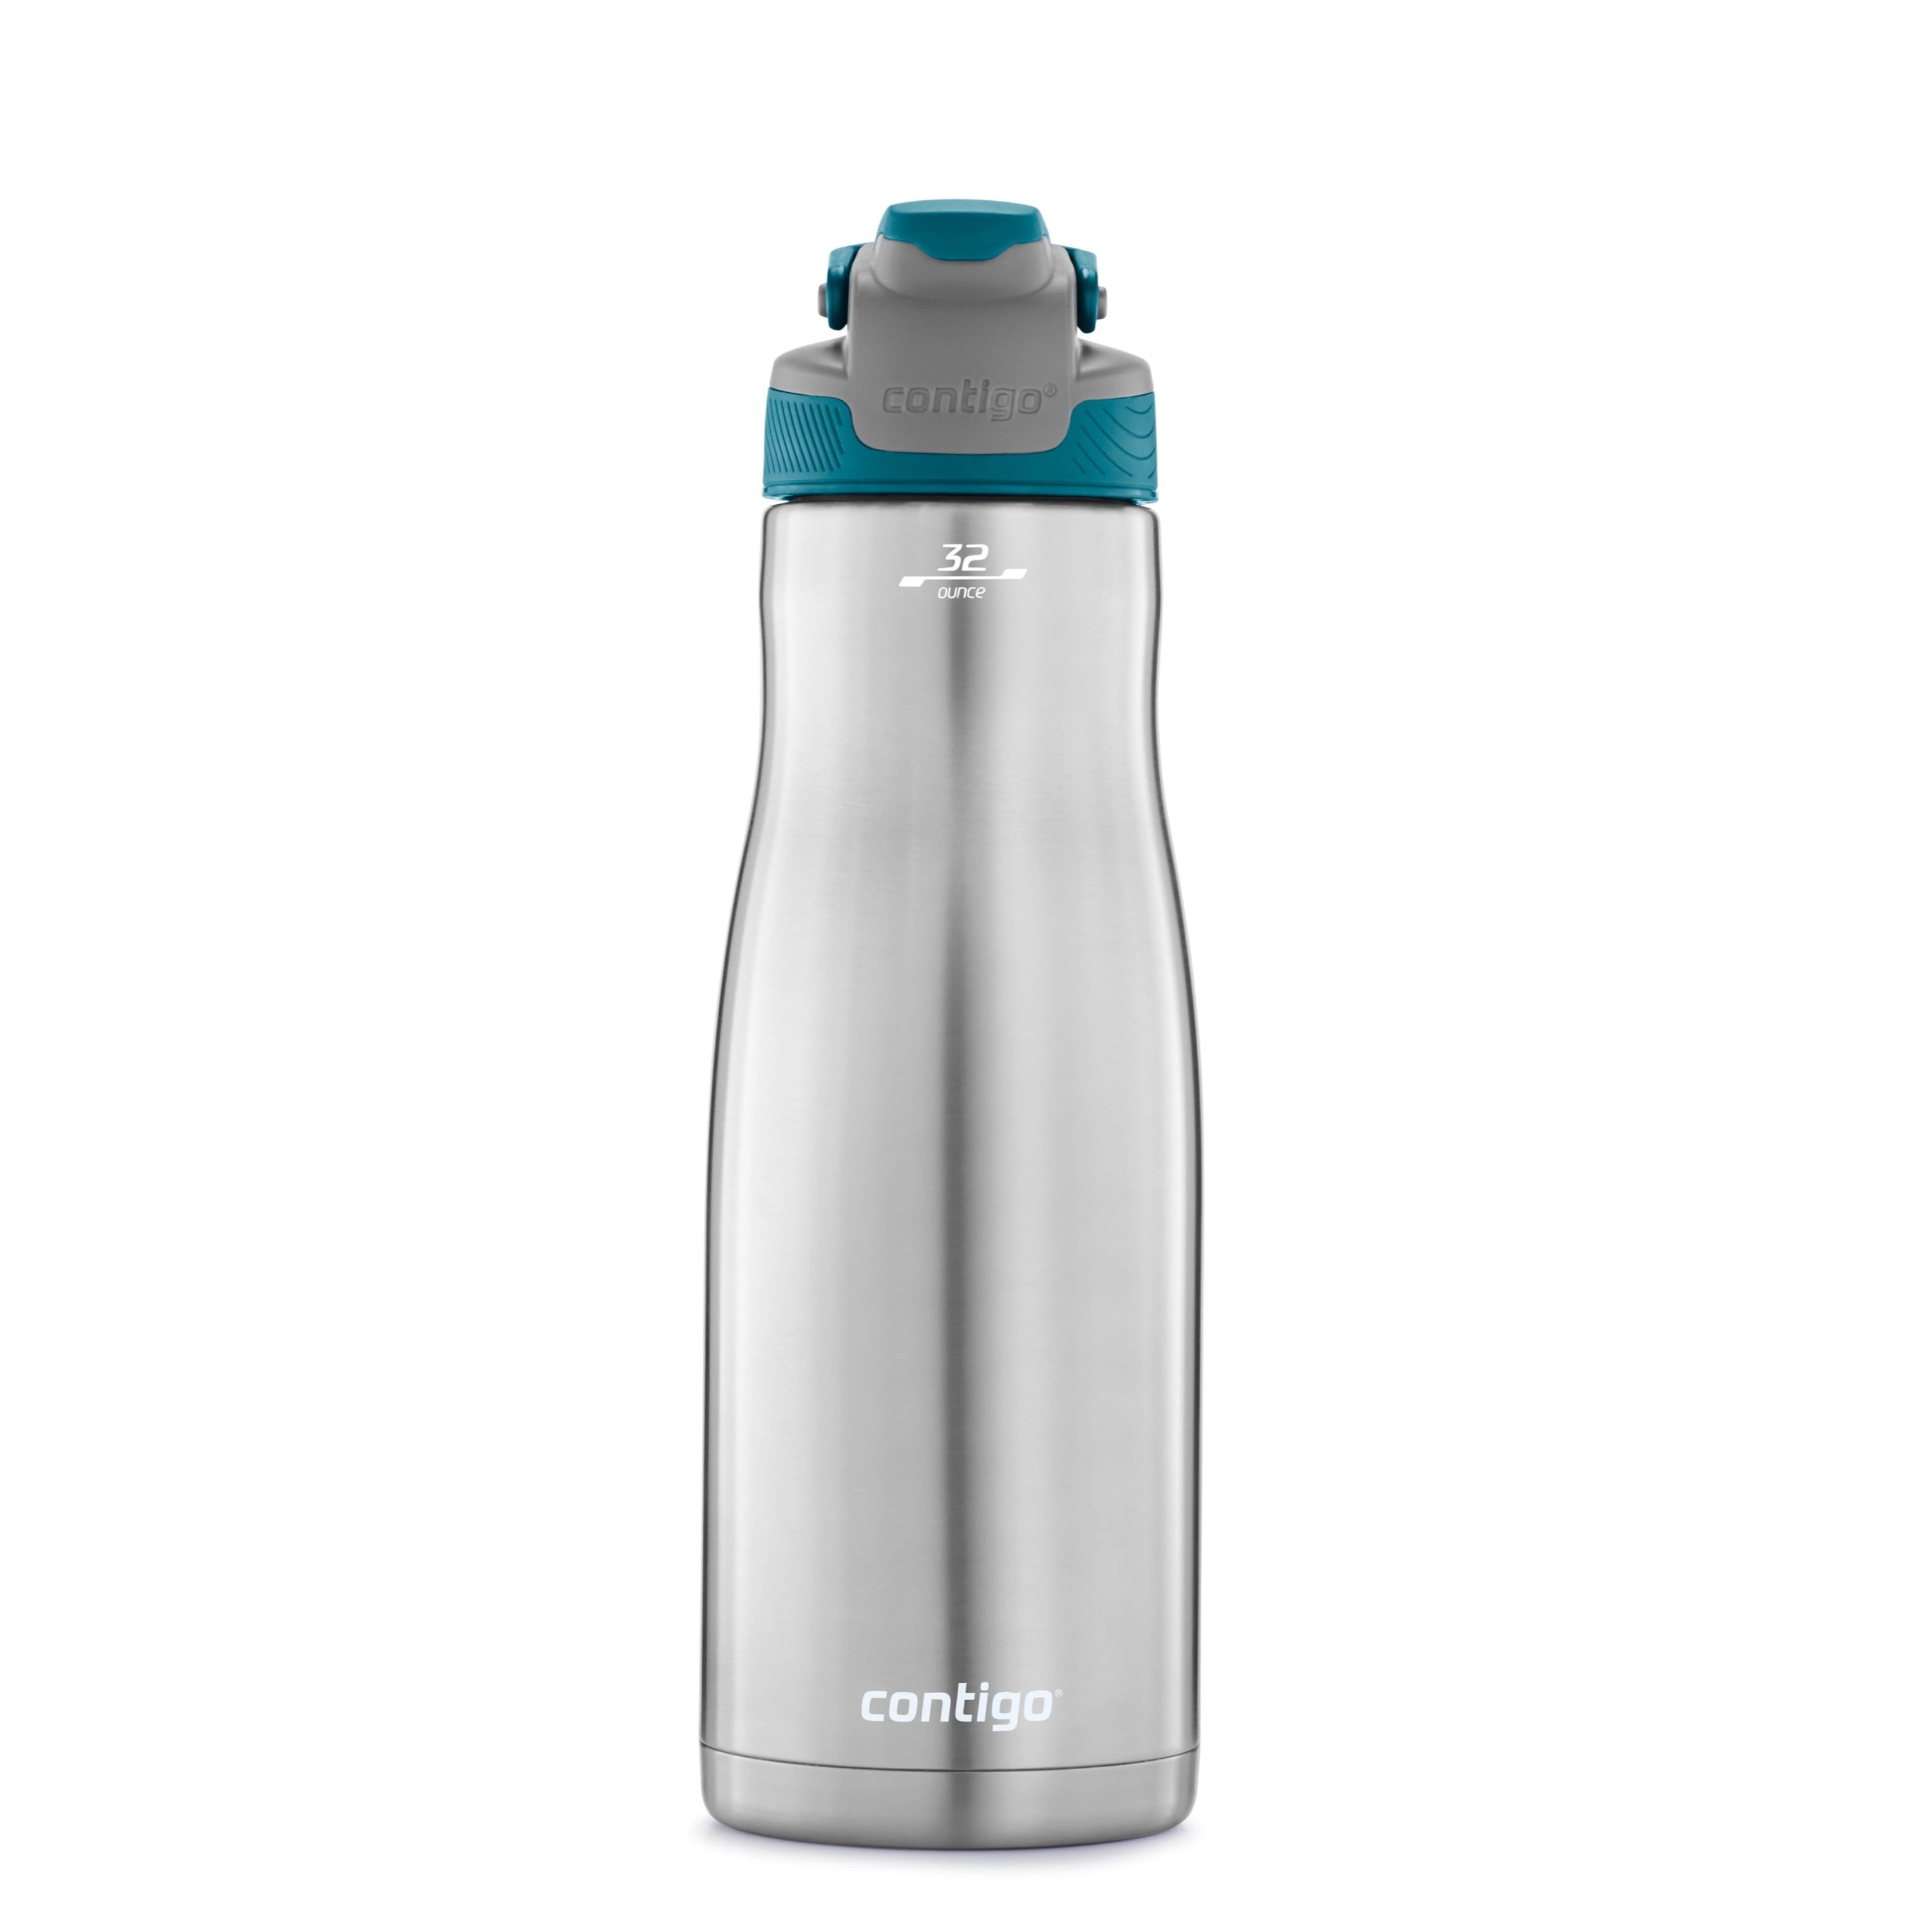 Contigo Cortland Chill Stainless Steel Water Bottle with AUTOSEAL Lid  Stainless Steel with Juniper, 32 fl oz. 